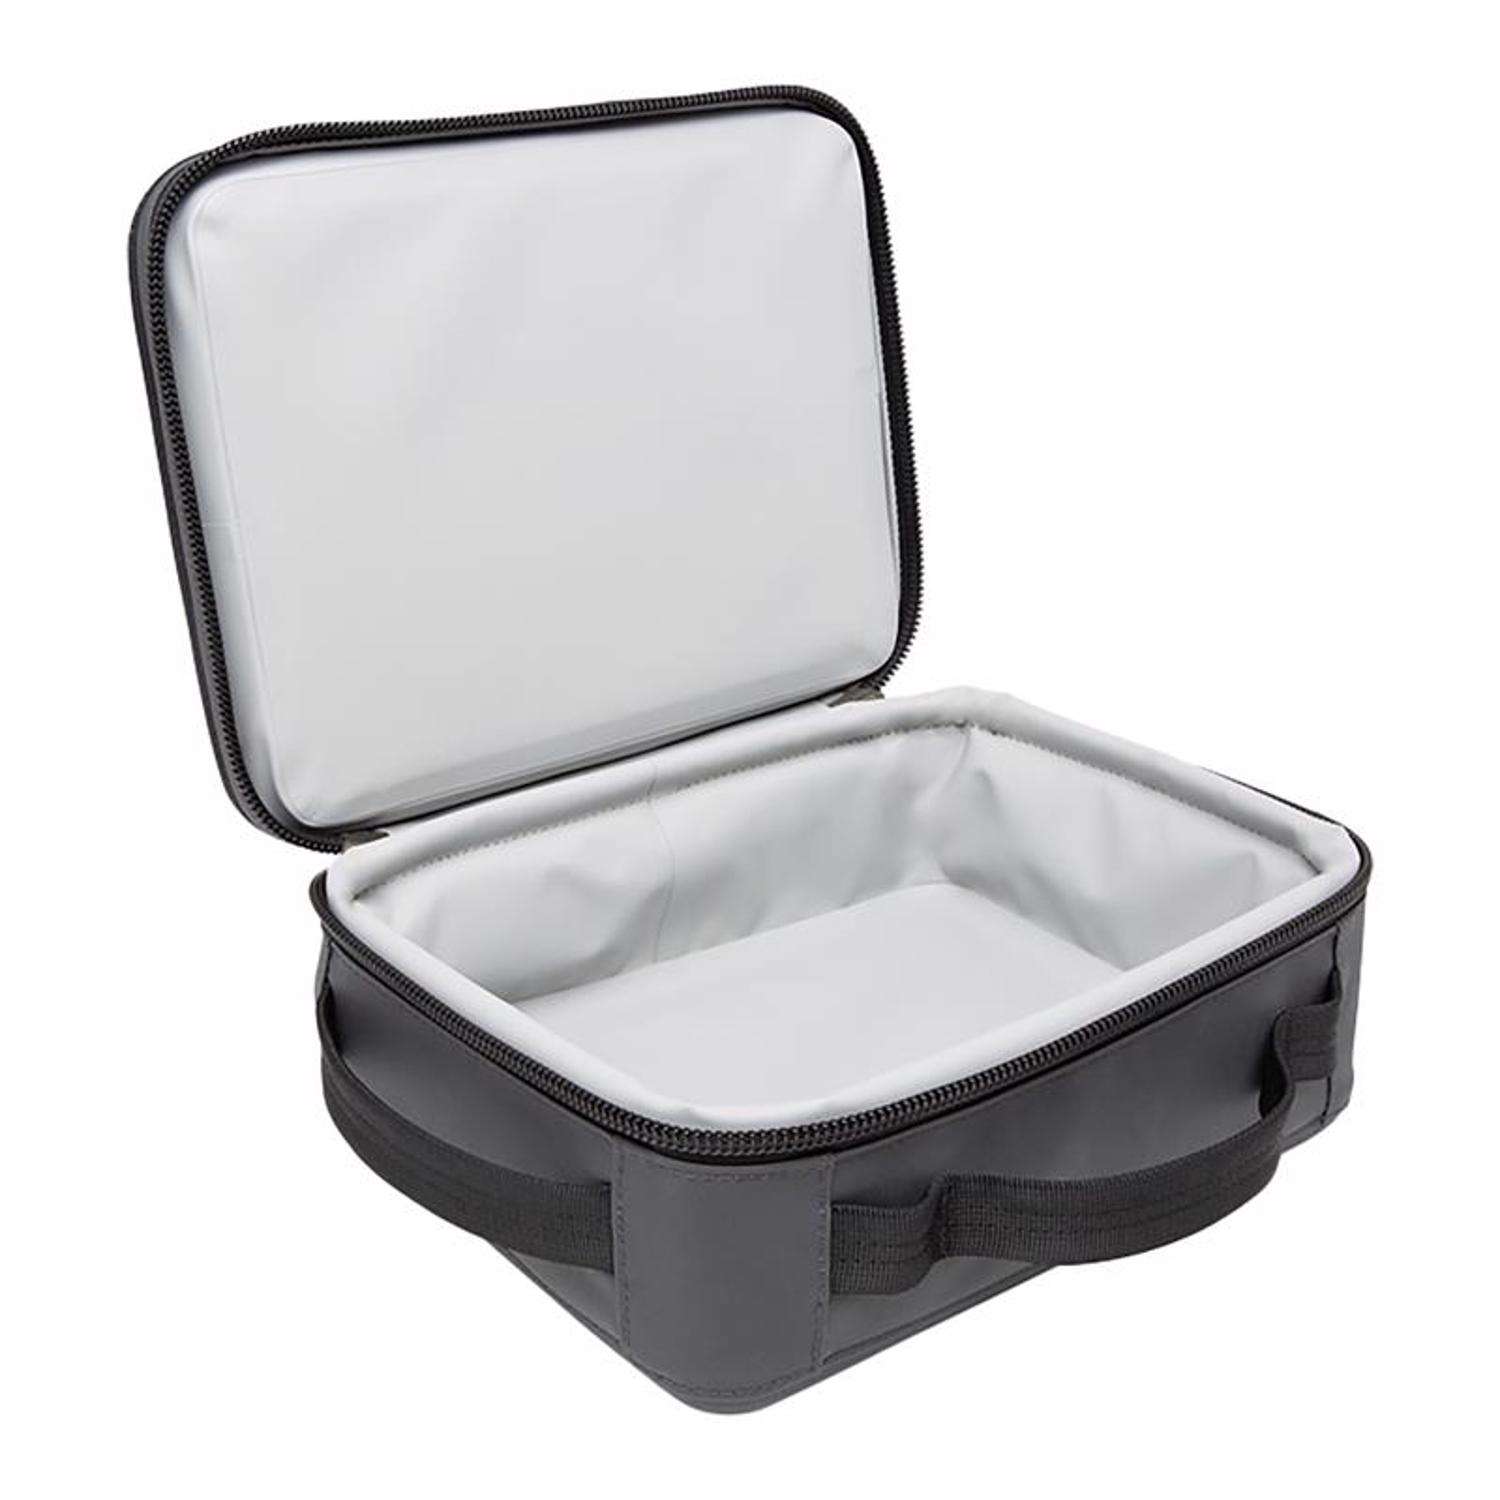 Stanley Lunch Box Cooler Set  Cool Sh*t You Can Buy - Find Cool Things To  Buy